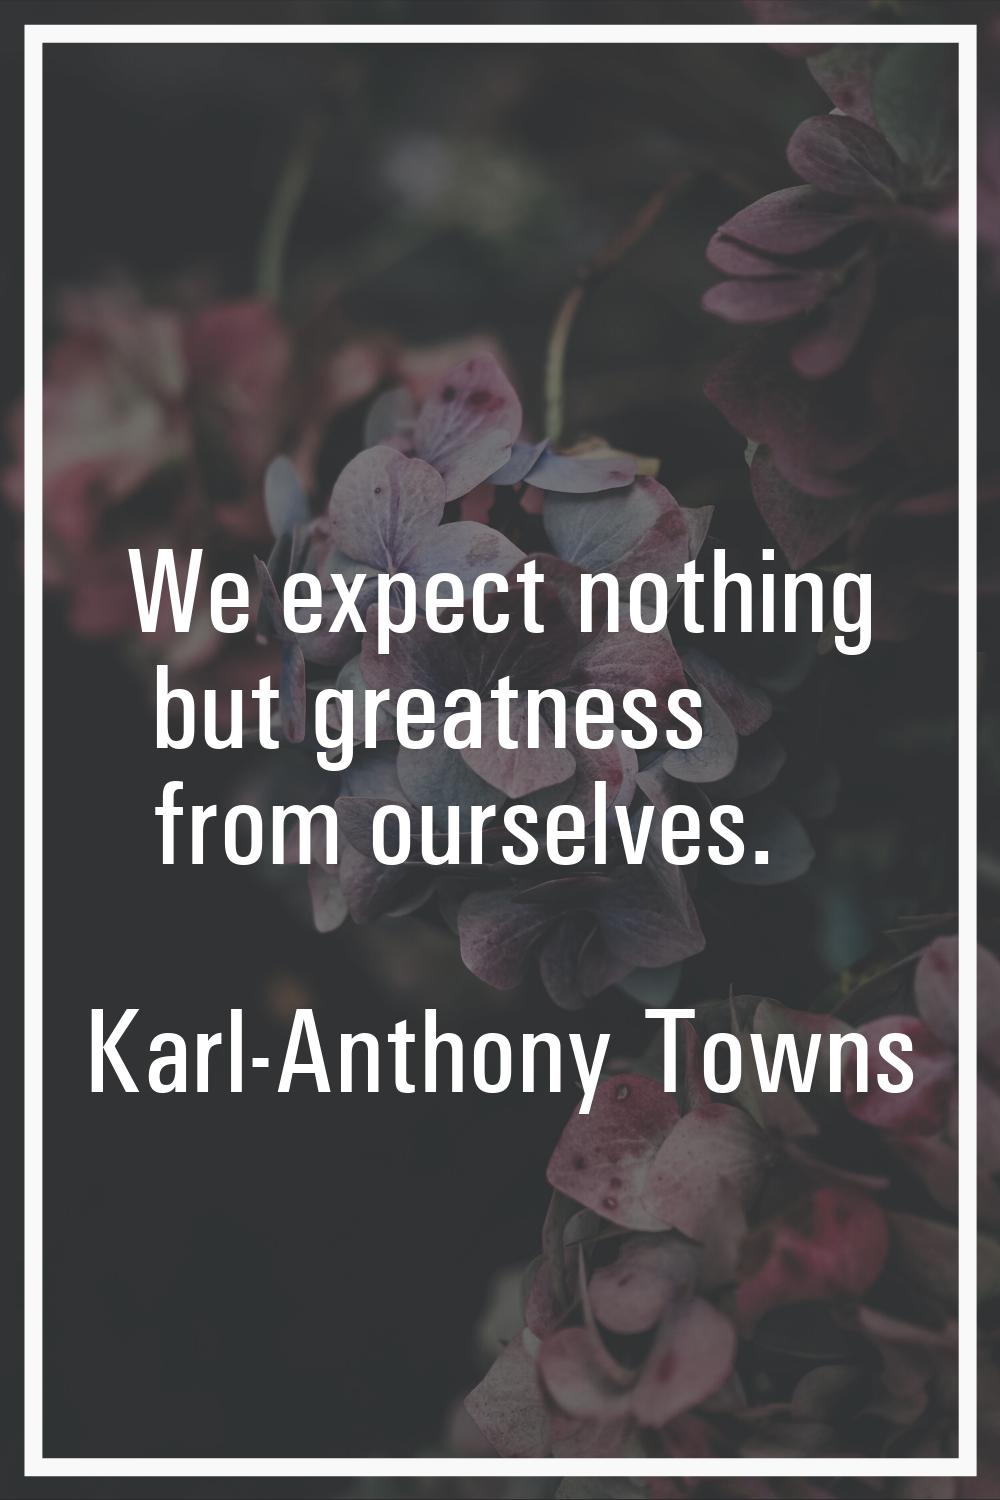 We expect nothing but greatness from ourselves.